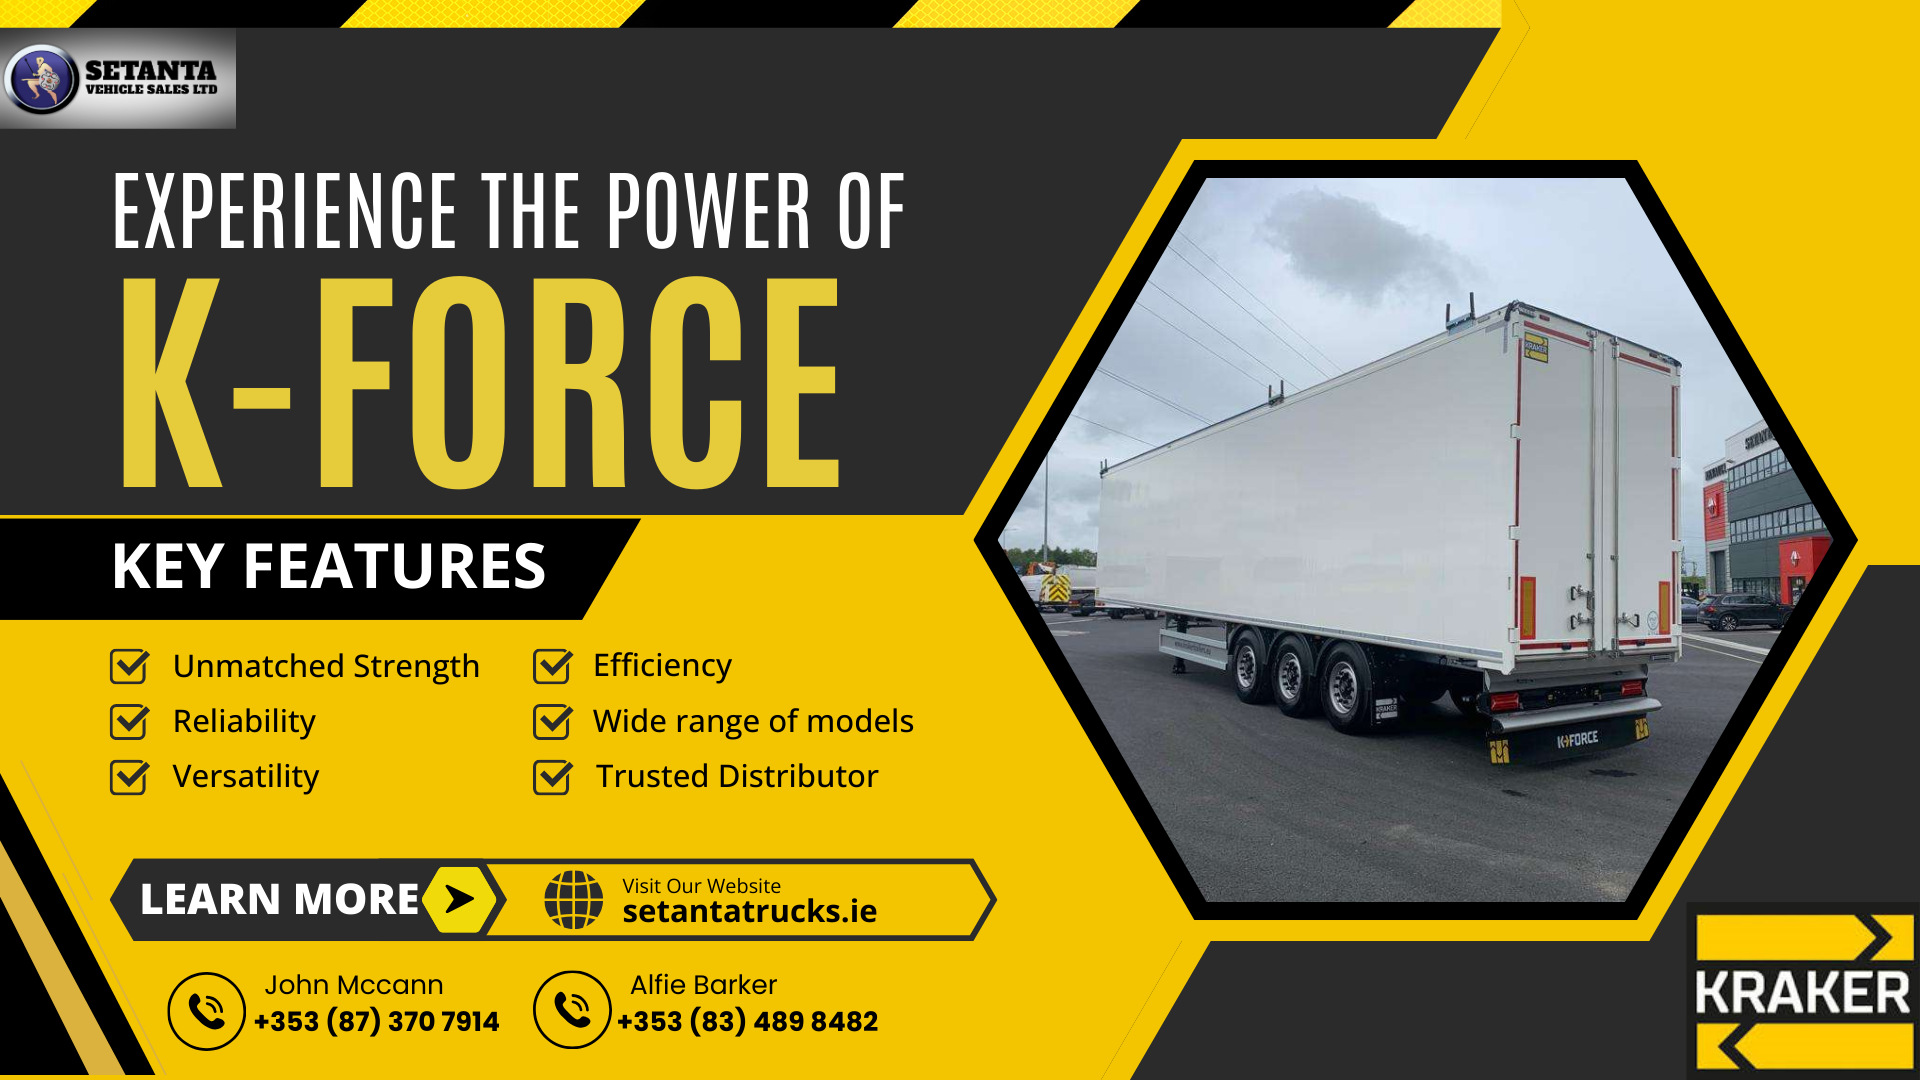 The Future of Freight: Kraker K-Force’s Revolution in the Trailer Industry